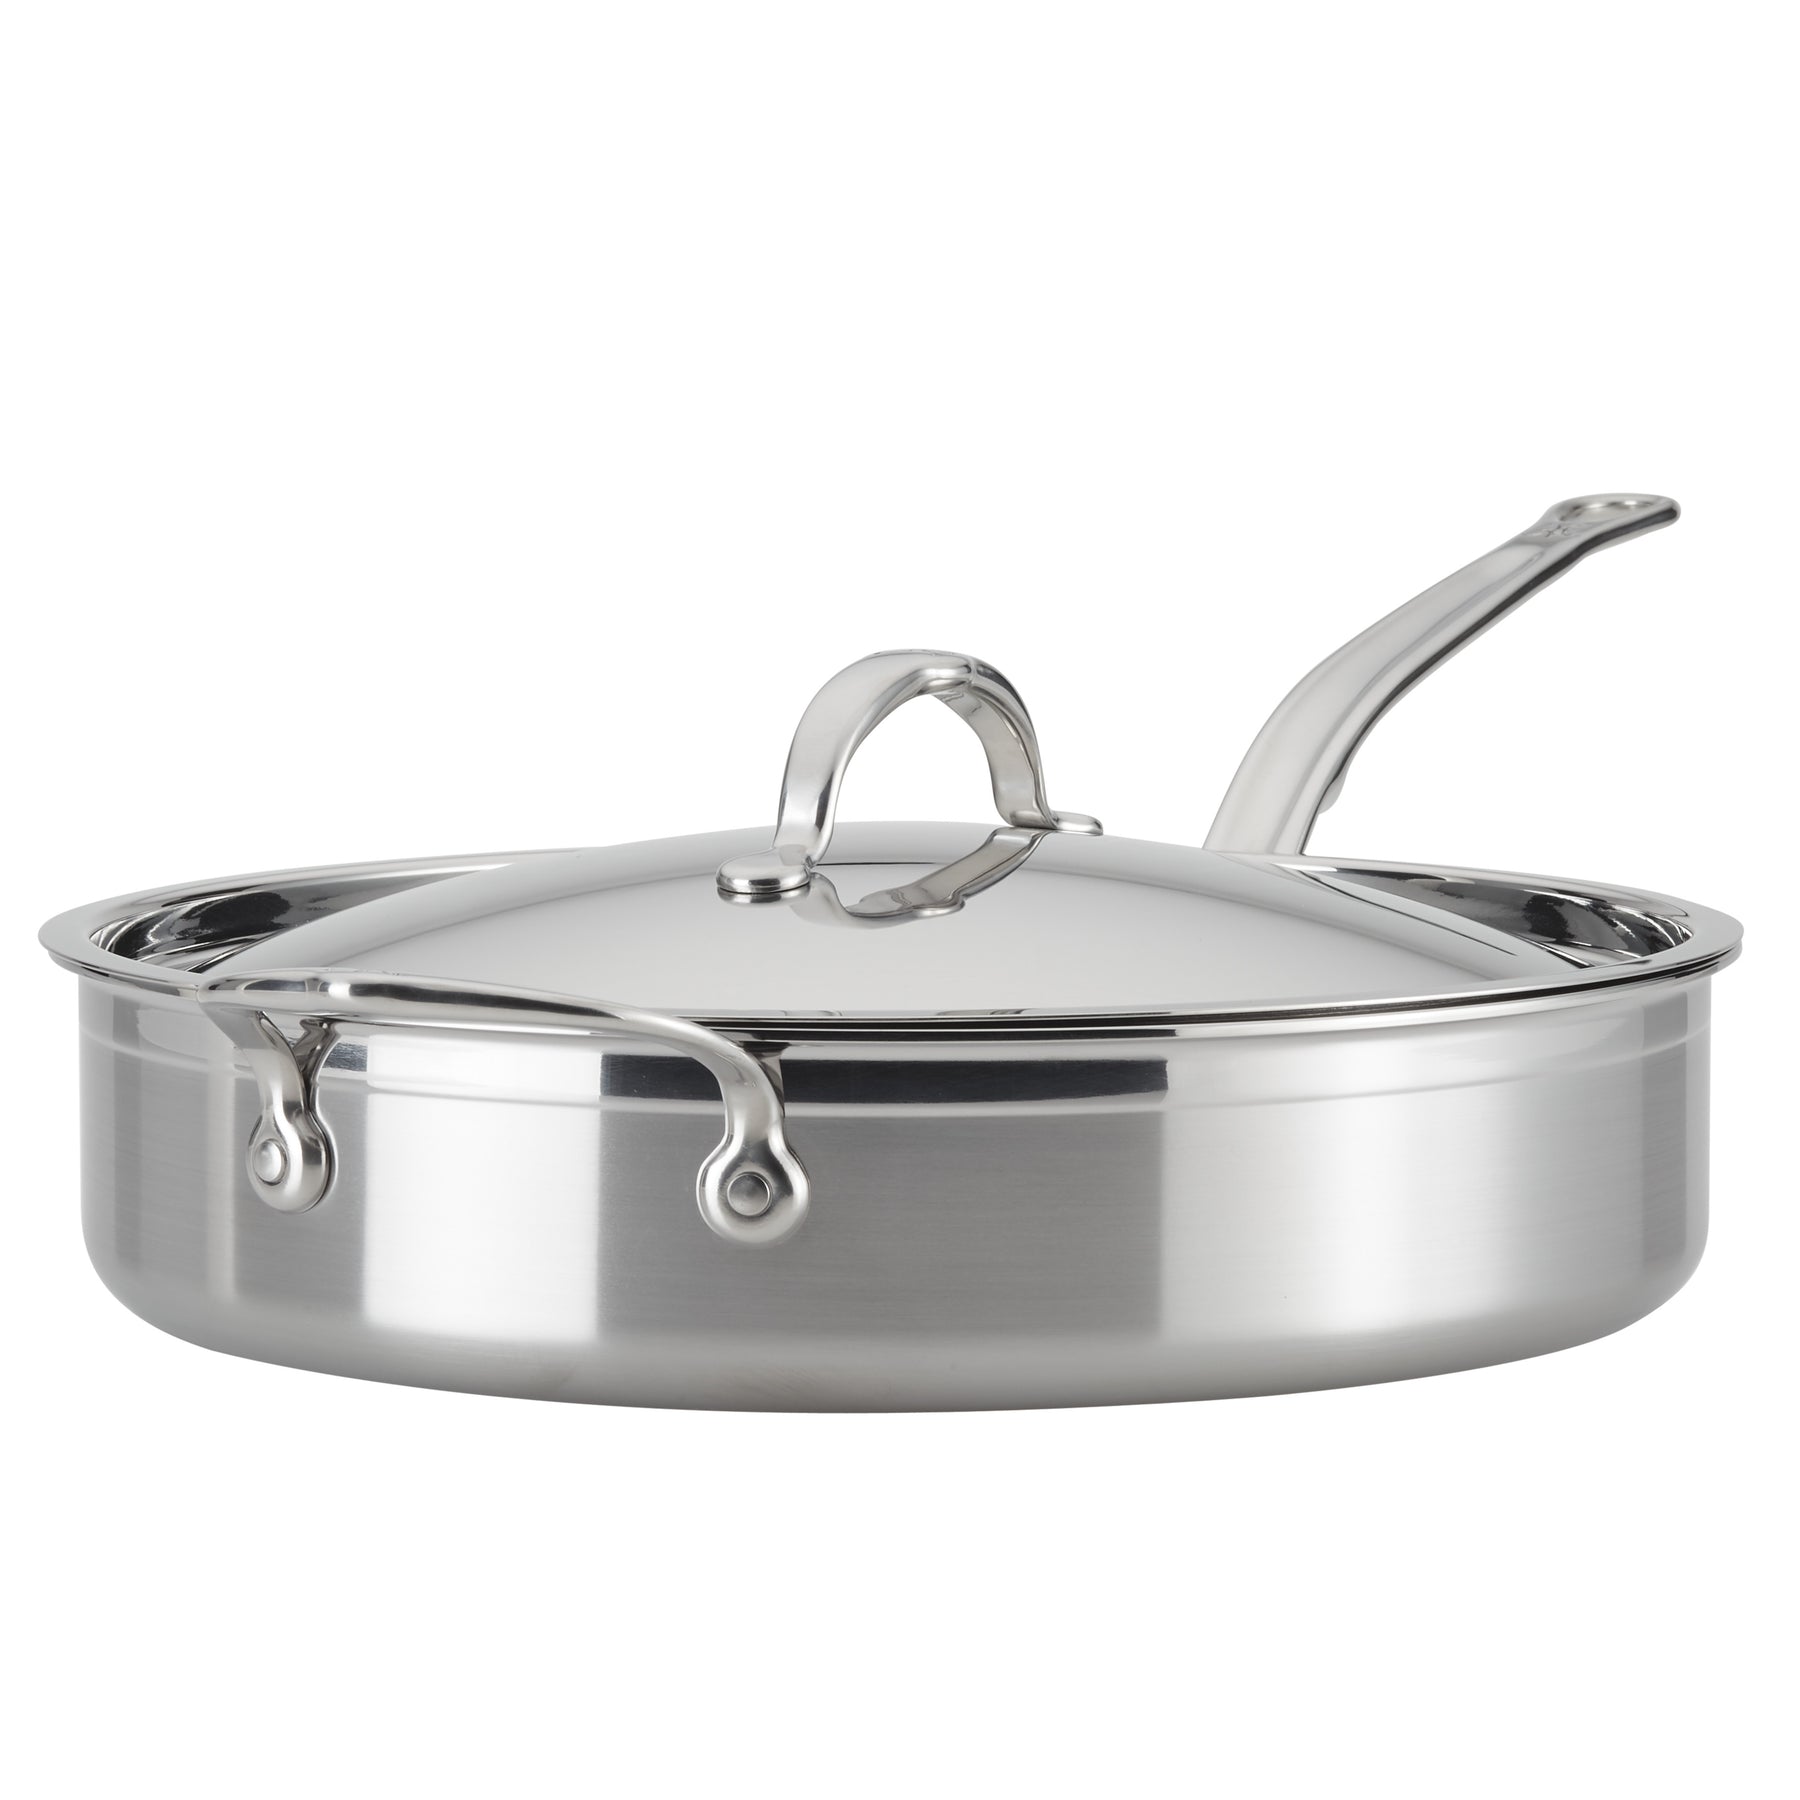 Hestan ProBond Professional Clad Stainless Steel - 5 Qt Covered Saute